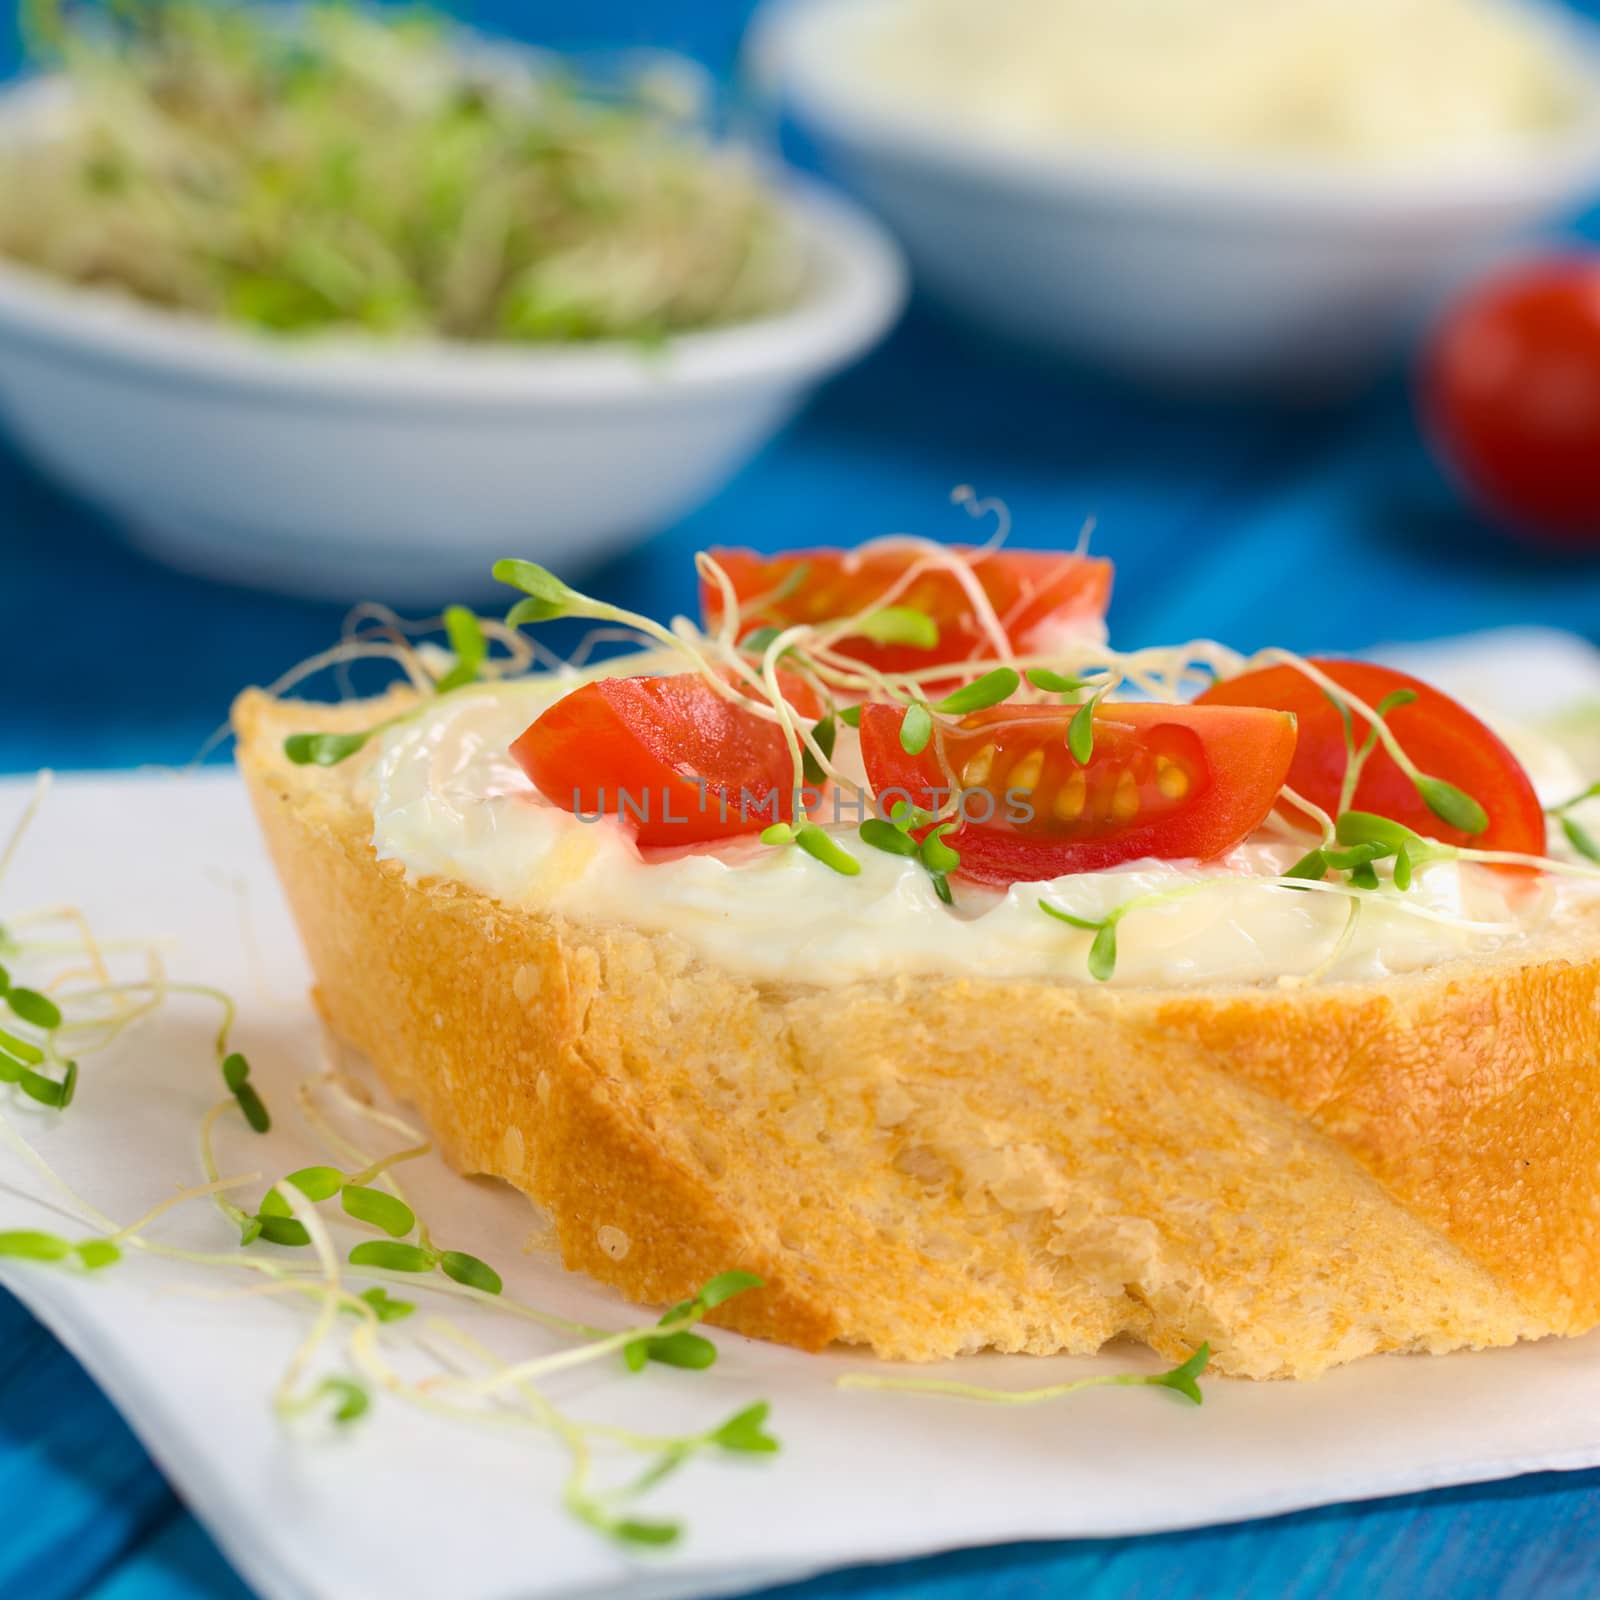 Baguette with Cream Cheese, Alfalfa Sprouts and Cherry Tomatoes by ildi